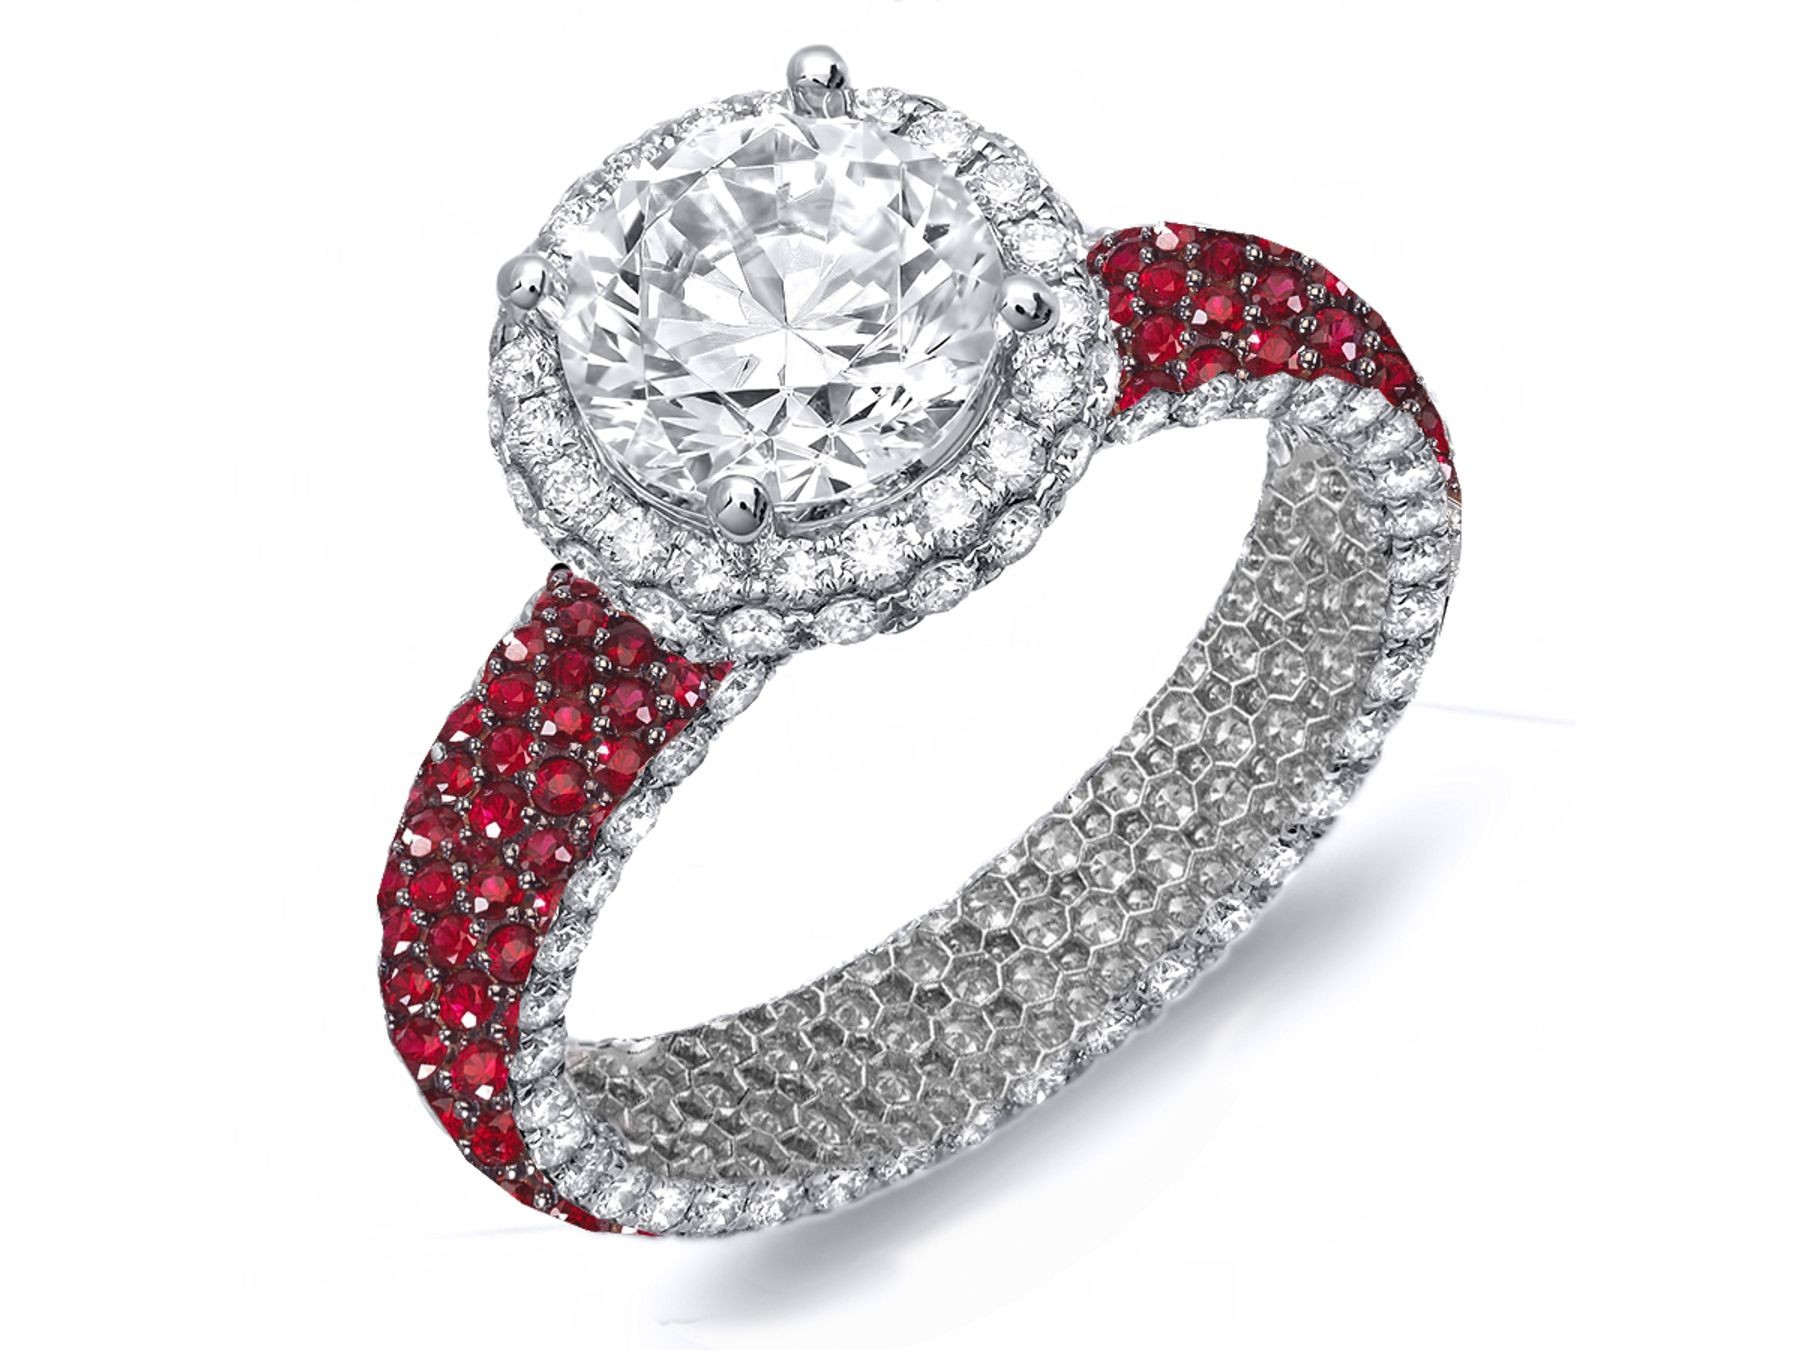 Custom Delicate French Pave Halo Diamonds & Red Rubies Accent Rings